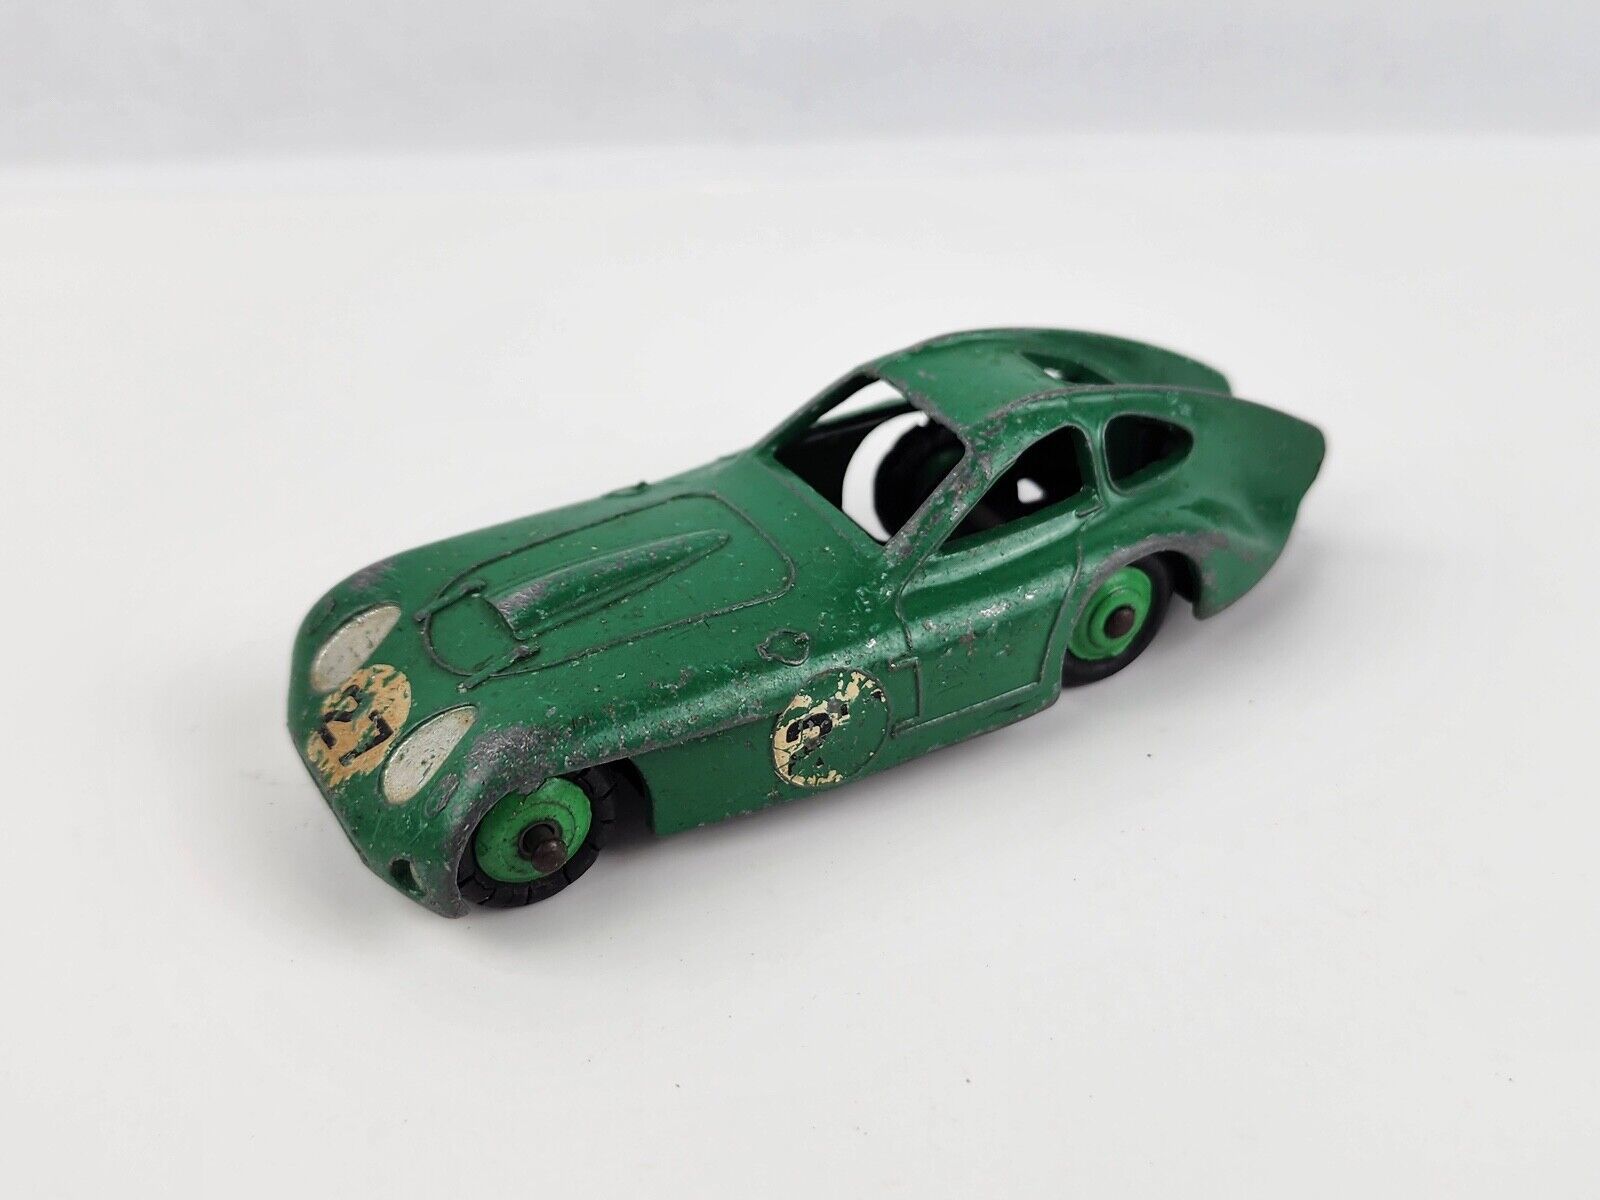 Primary image for Vintage Meccano England Dinky Toys 163 - Bristol 450 Race Car Green Nice cond.